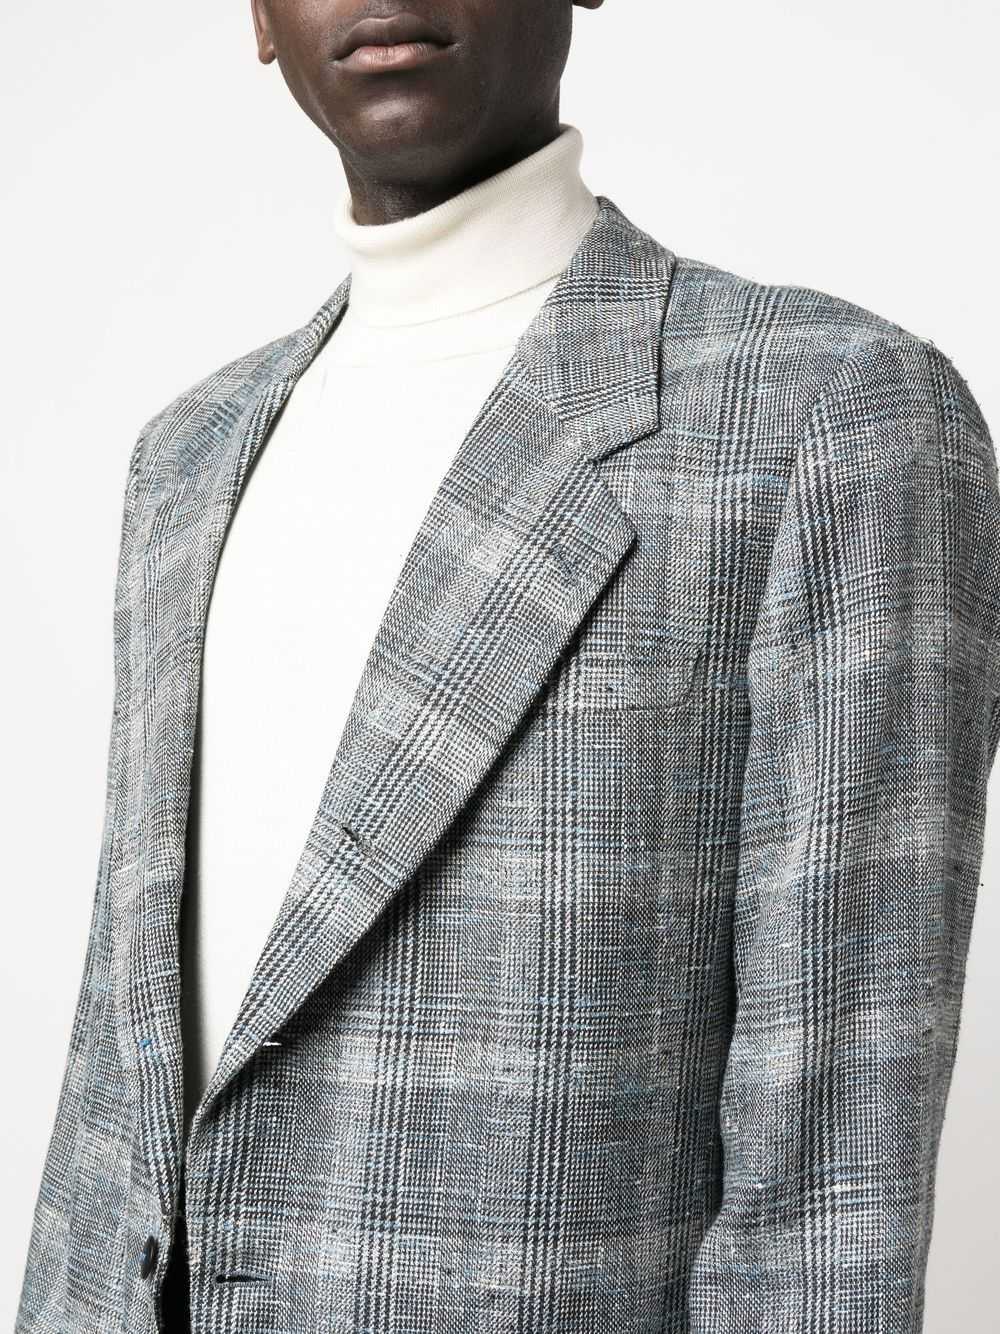 Pierre Cardin Pre-Owned 1980s Prince of Wales che… - image 5